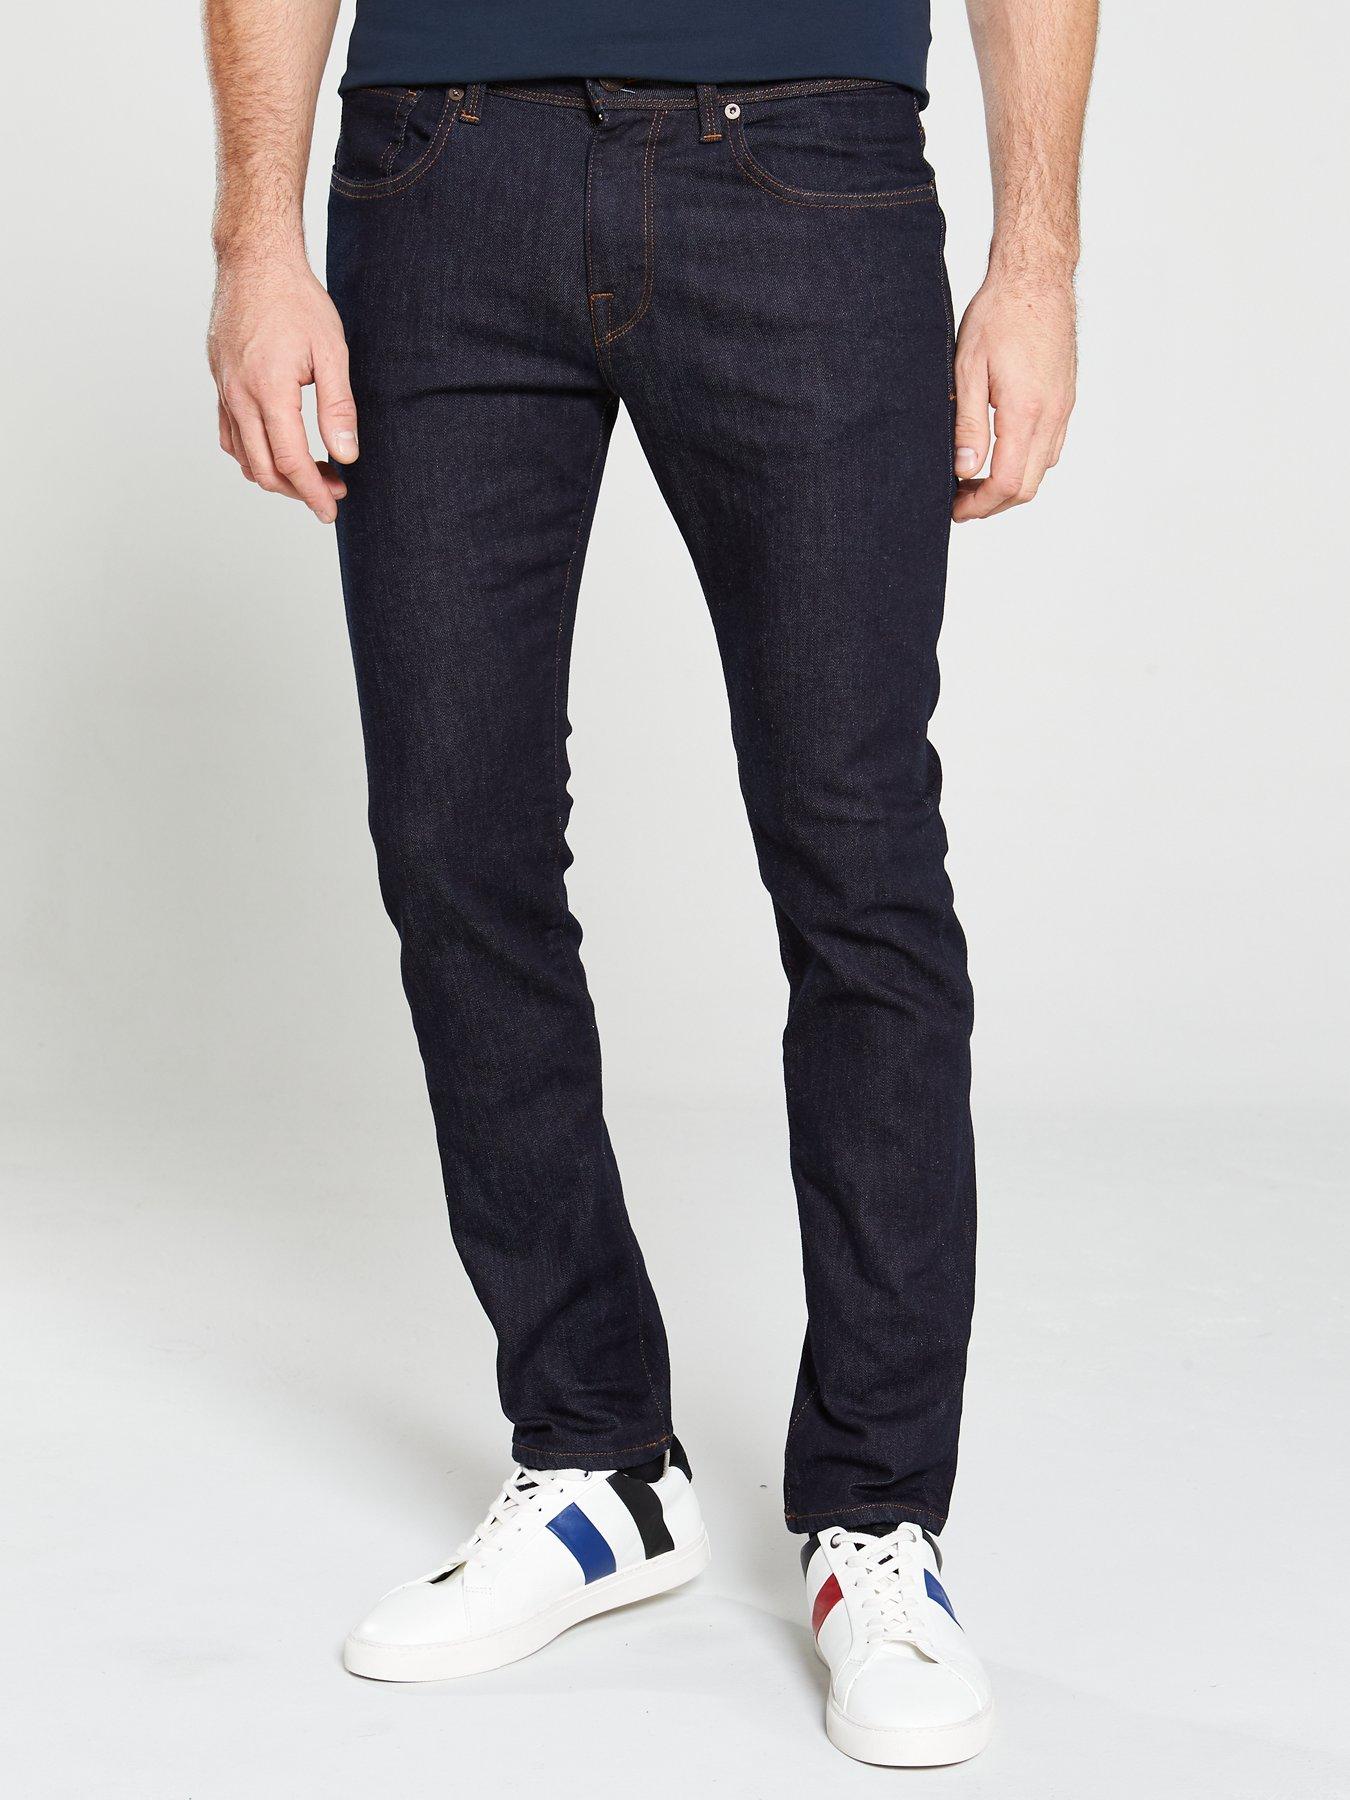 selected homme jeans indigo